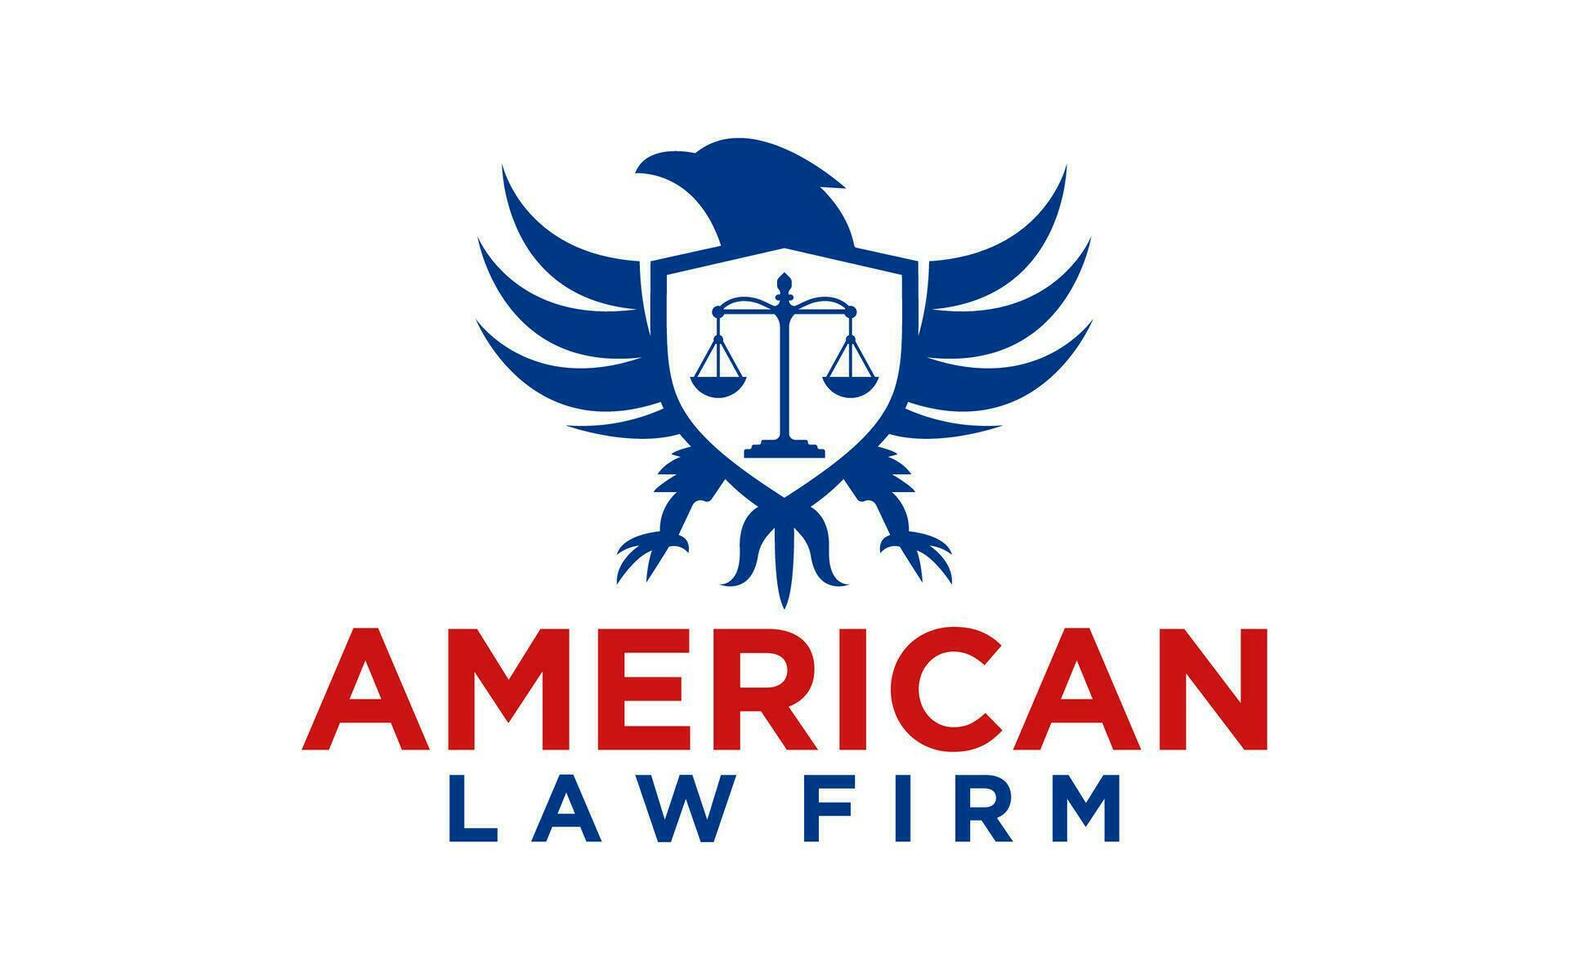 America law firm logo design eagle firm law icon justice vector